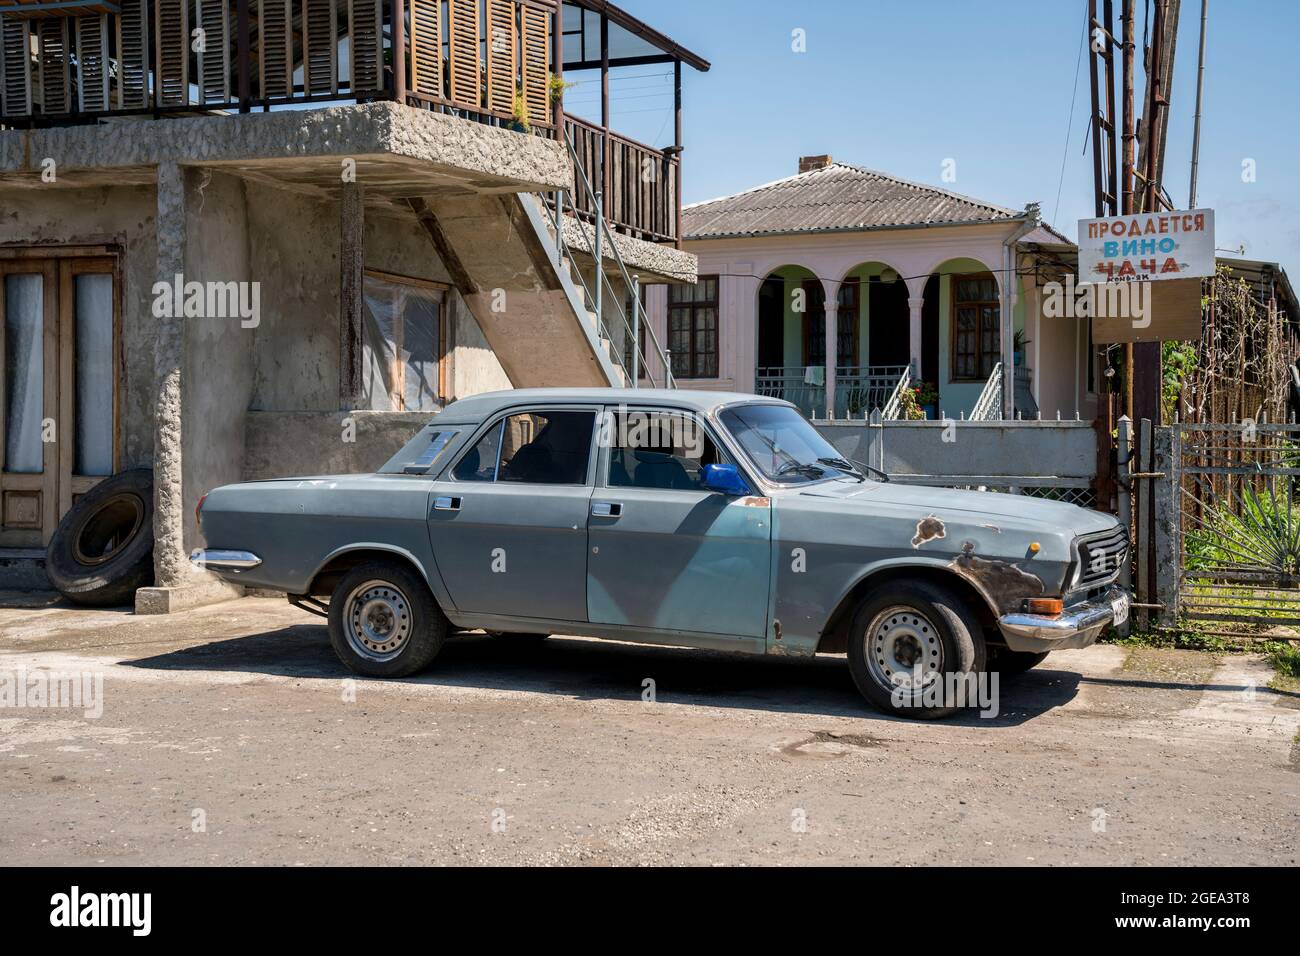 A Soviet car next to an advertisement for chacha which is a local wine product in the war ravaged seaside town of Ochamchire in Abkhazia. Stock Photo